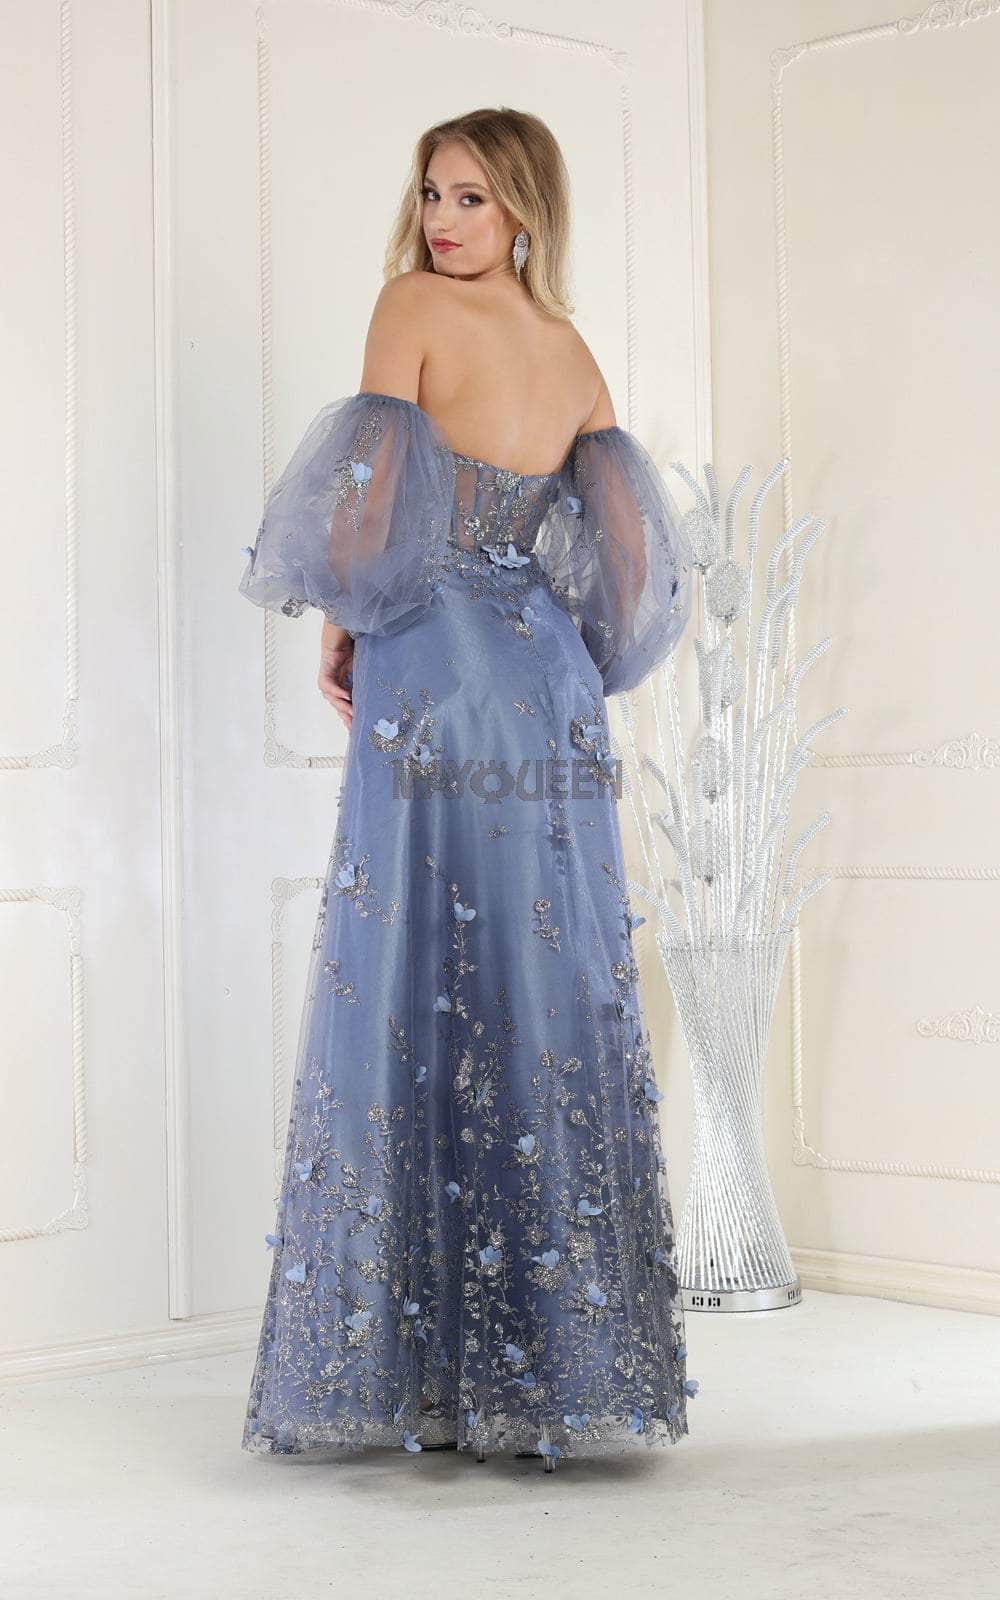 May Queen RQ8015 - Strapless Corseted Floral Gown Special Occasion Dress